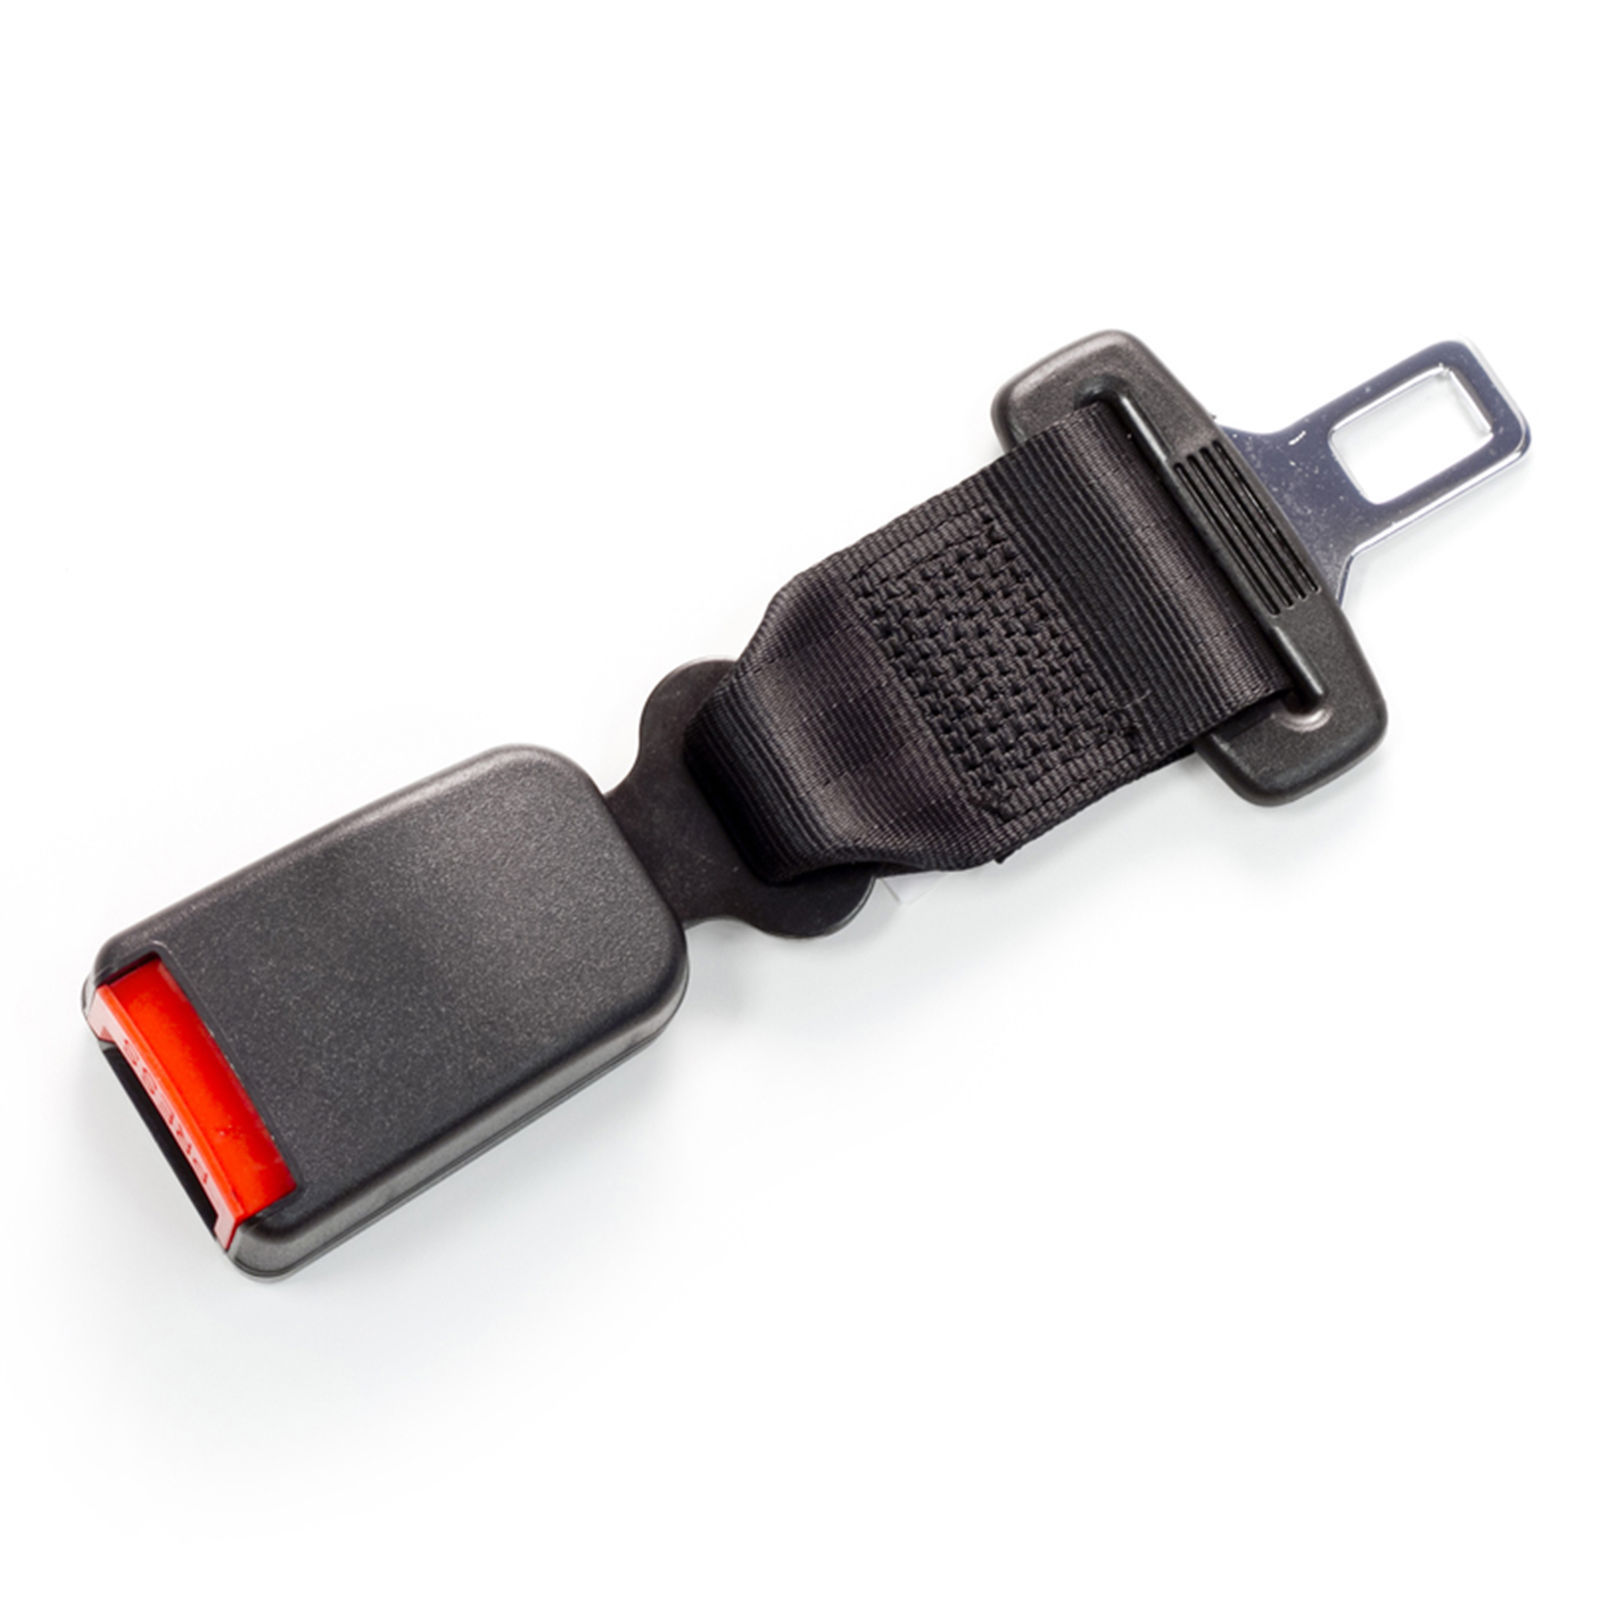 Seat Belt Extension for 2011 Nissan Murano Front Seats - E4 Safety Certified - $29.99